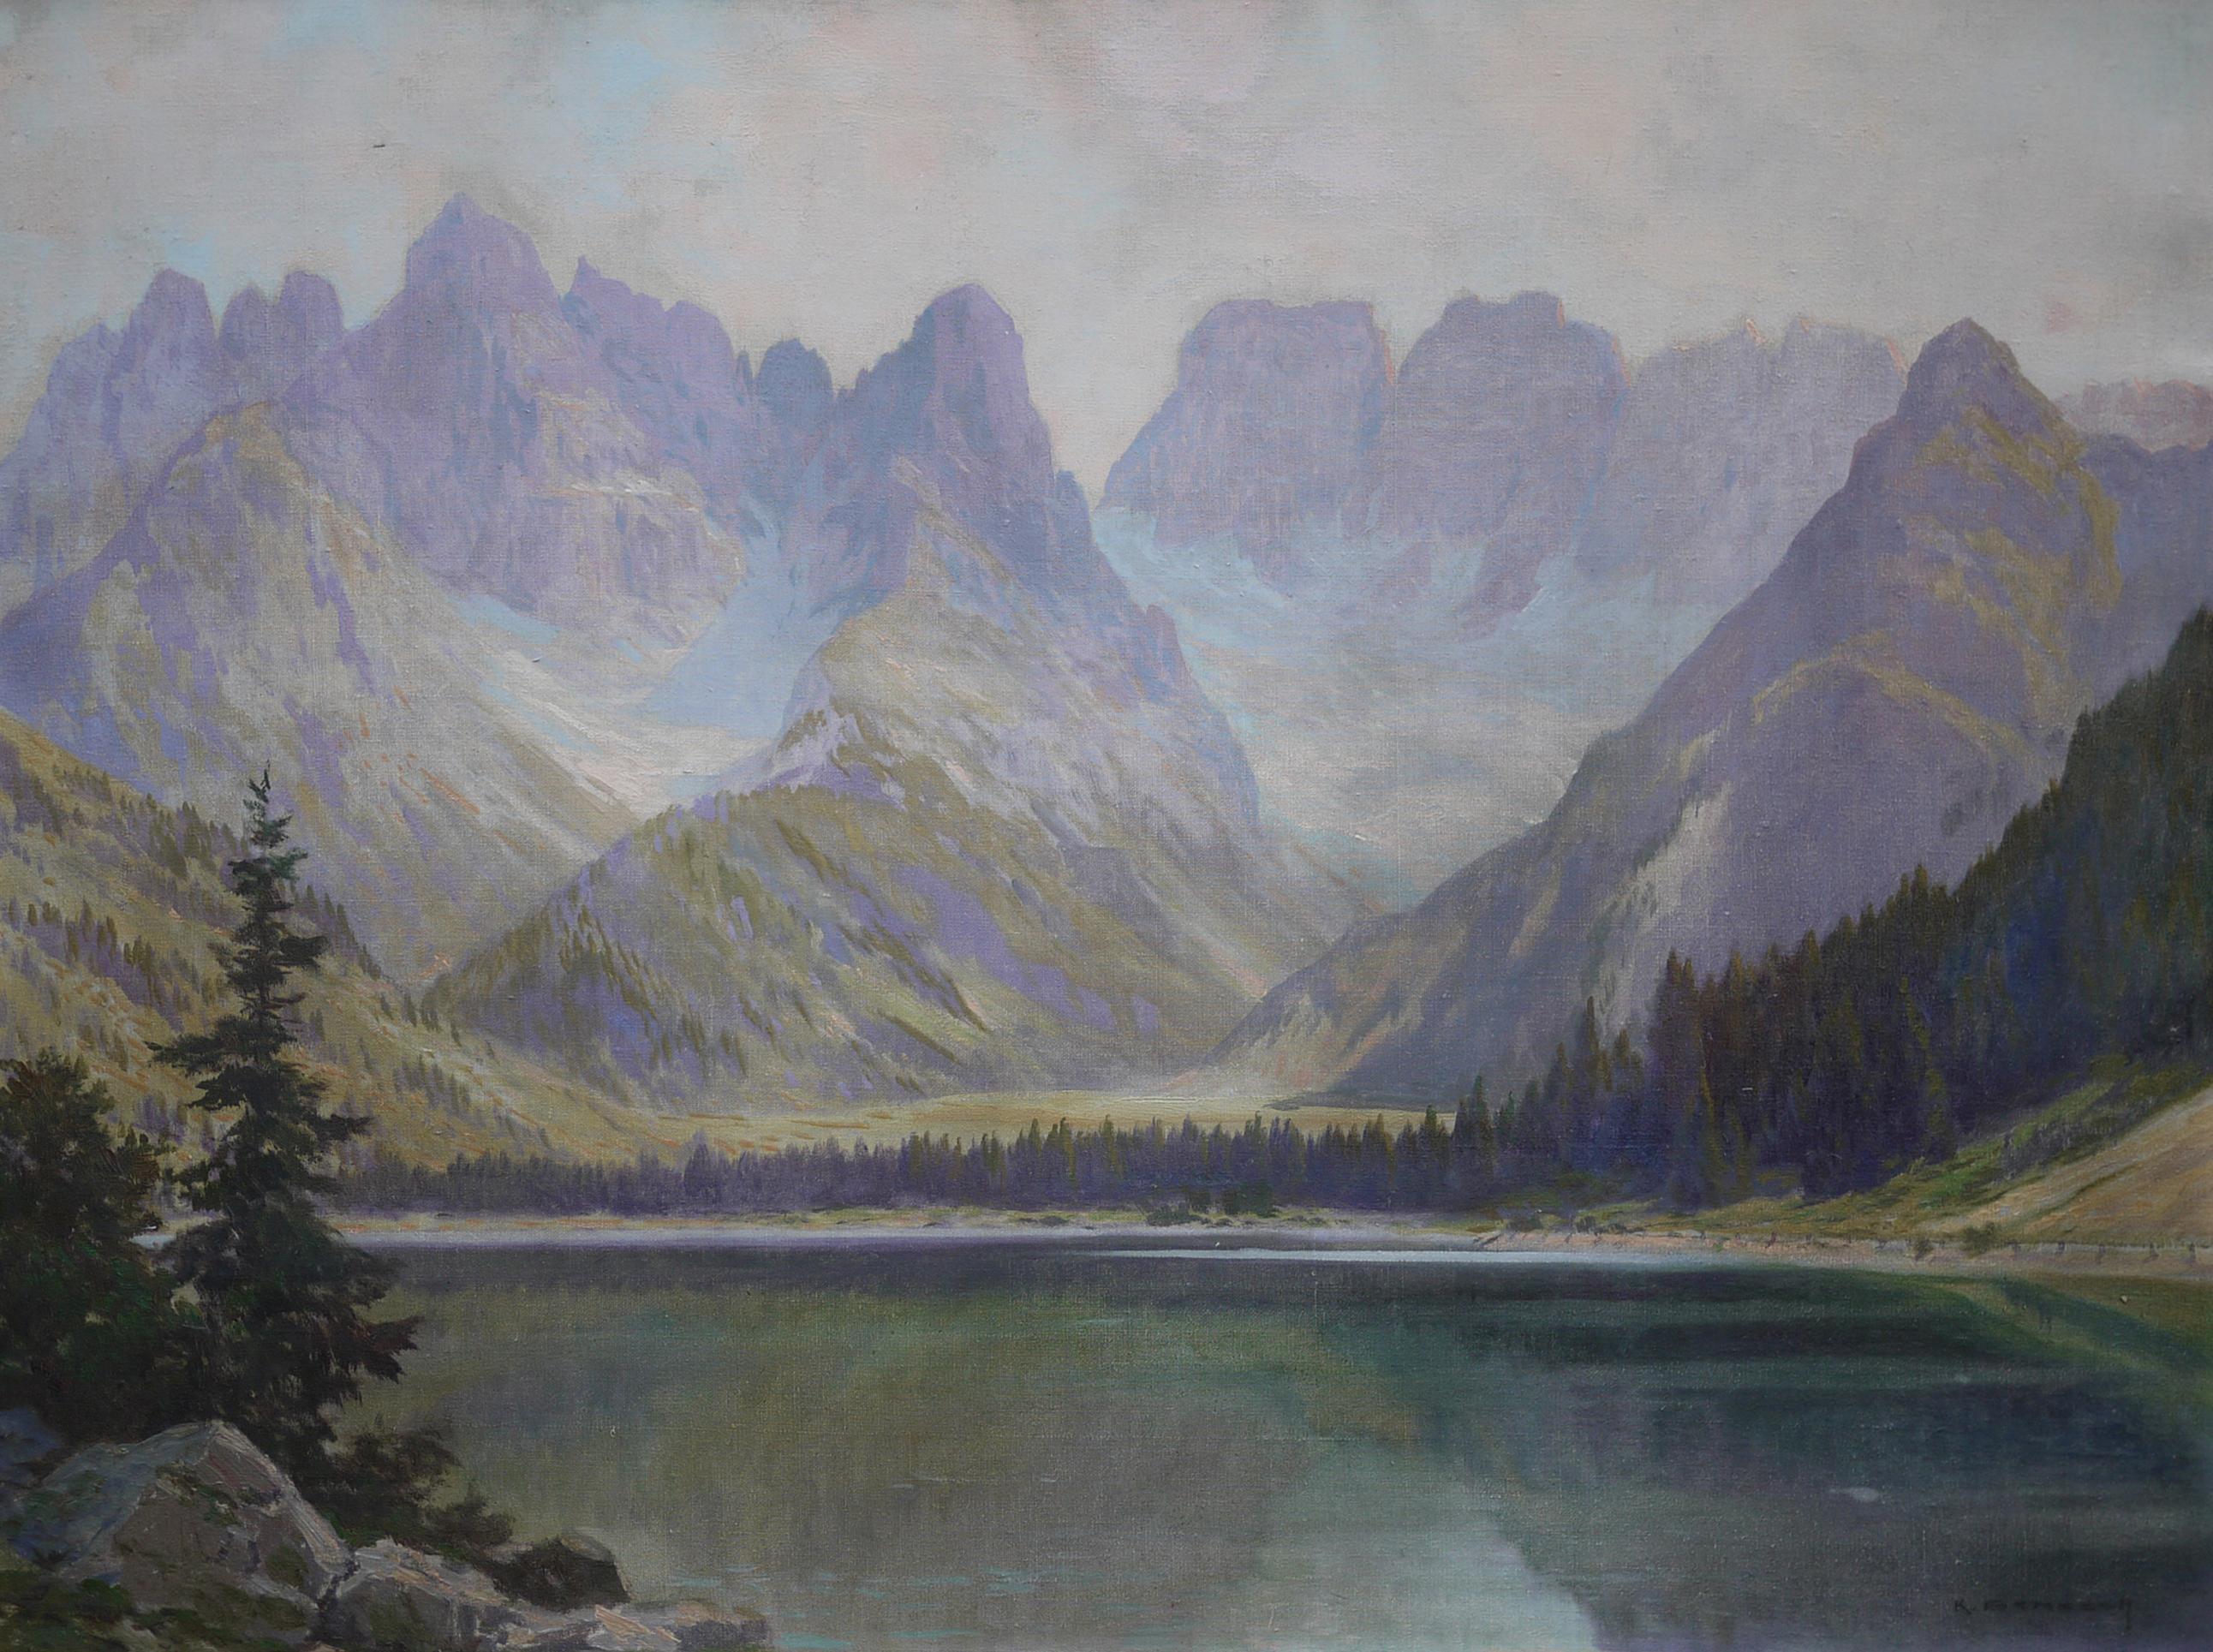 Monte Cristallo
Measures: 60 cm x 80 cm (without frame), oil on canvas, 1920s
11.8 in x 15.7 in (without frame)

K.Benesch
Monte Cristallo and Lake Landro (Durrensee) seen from the Val Pusteria.